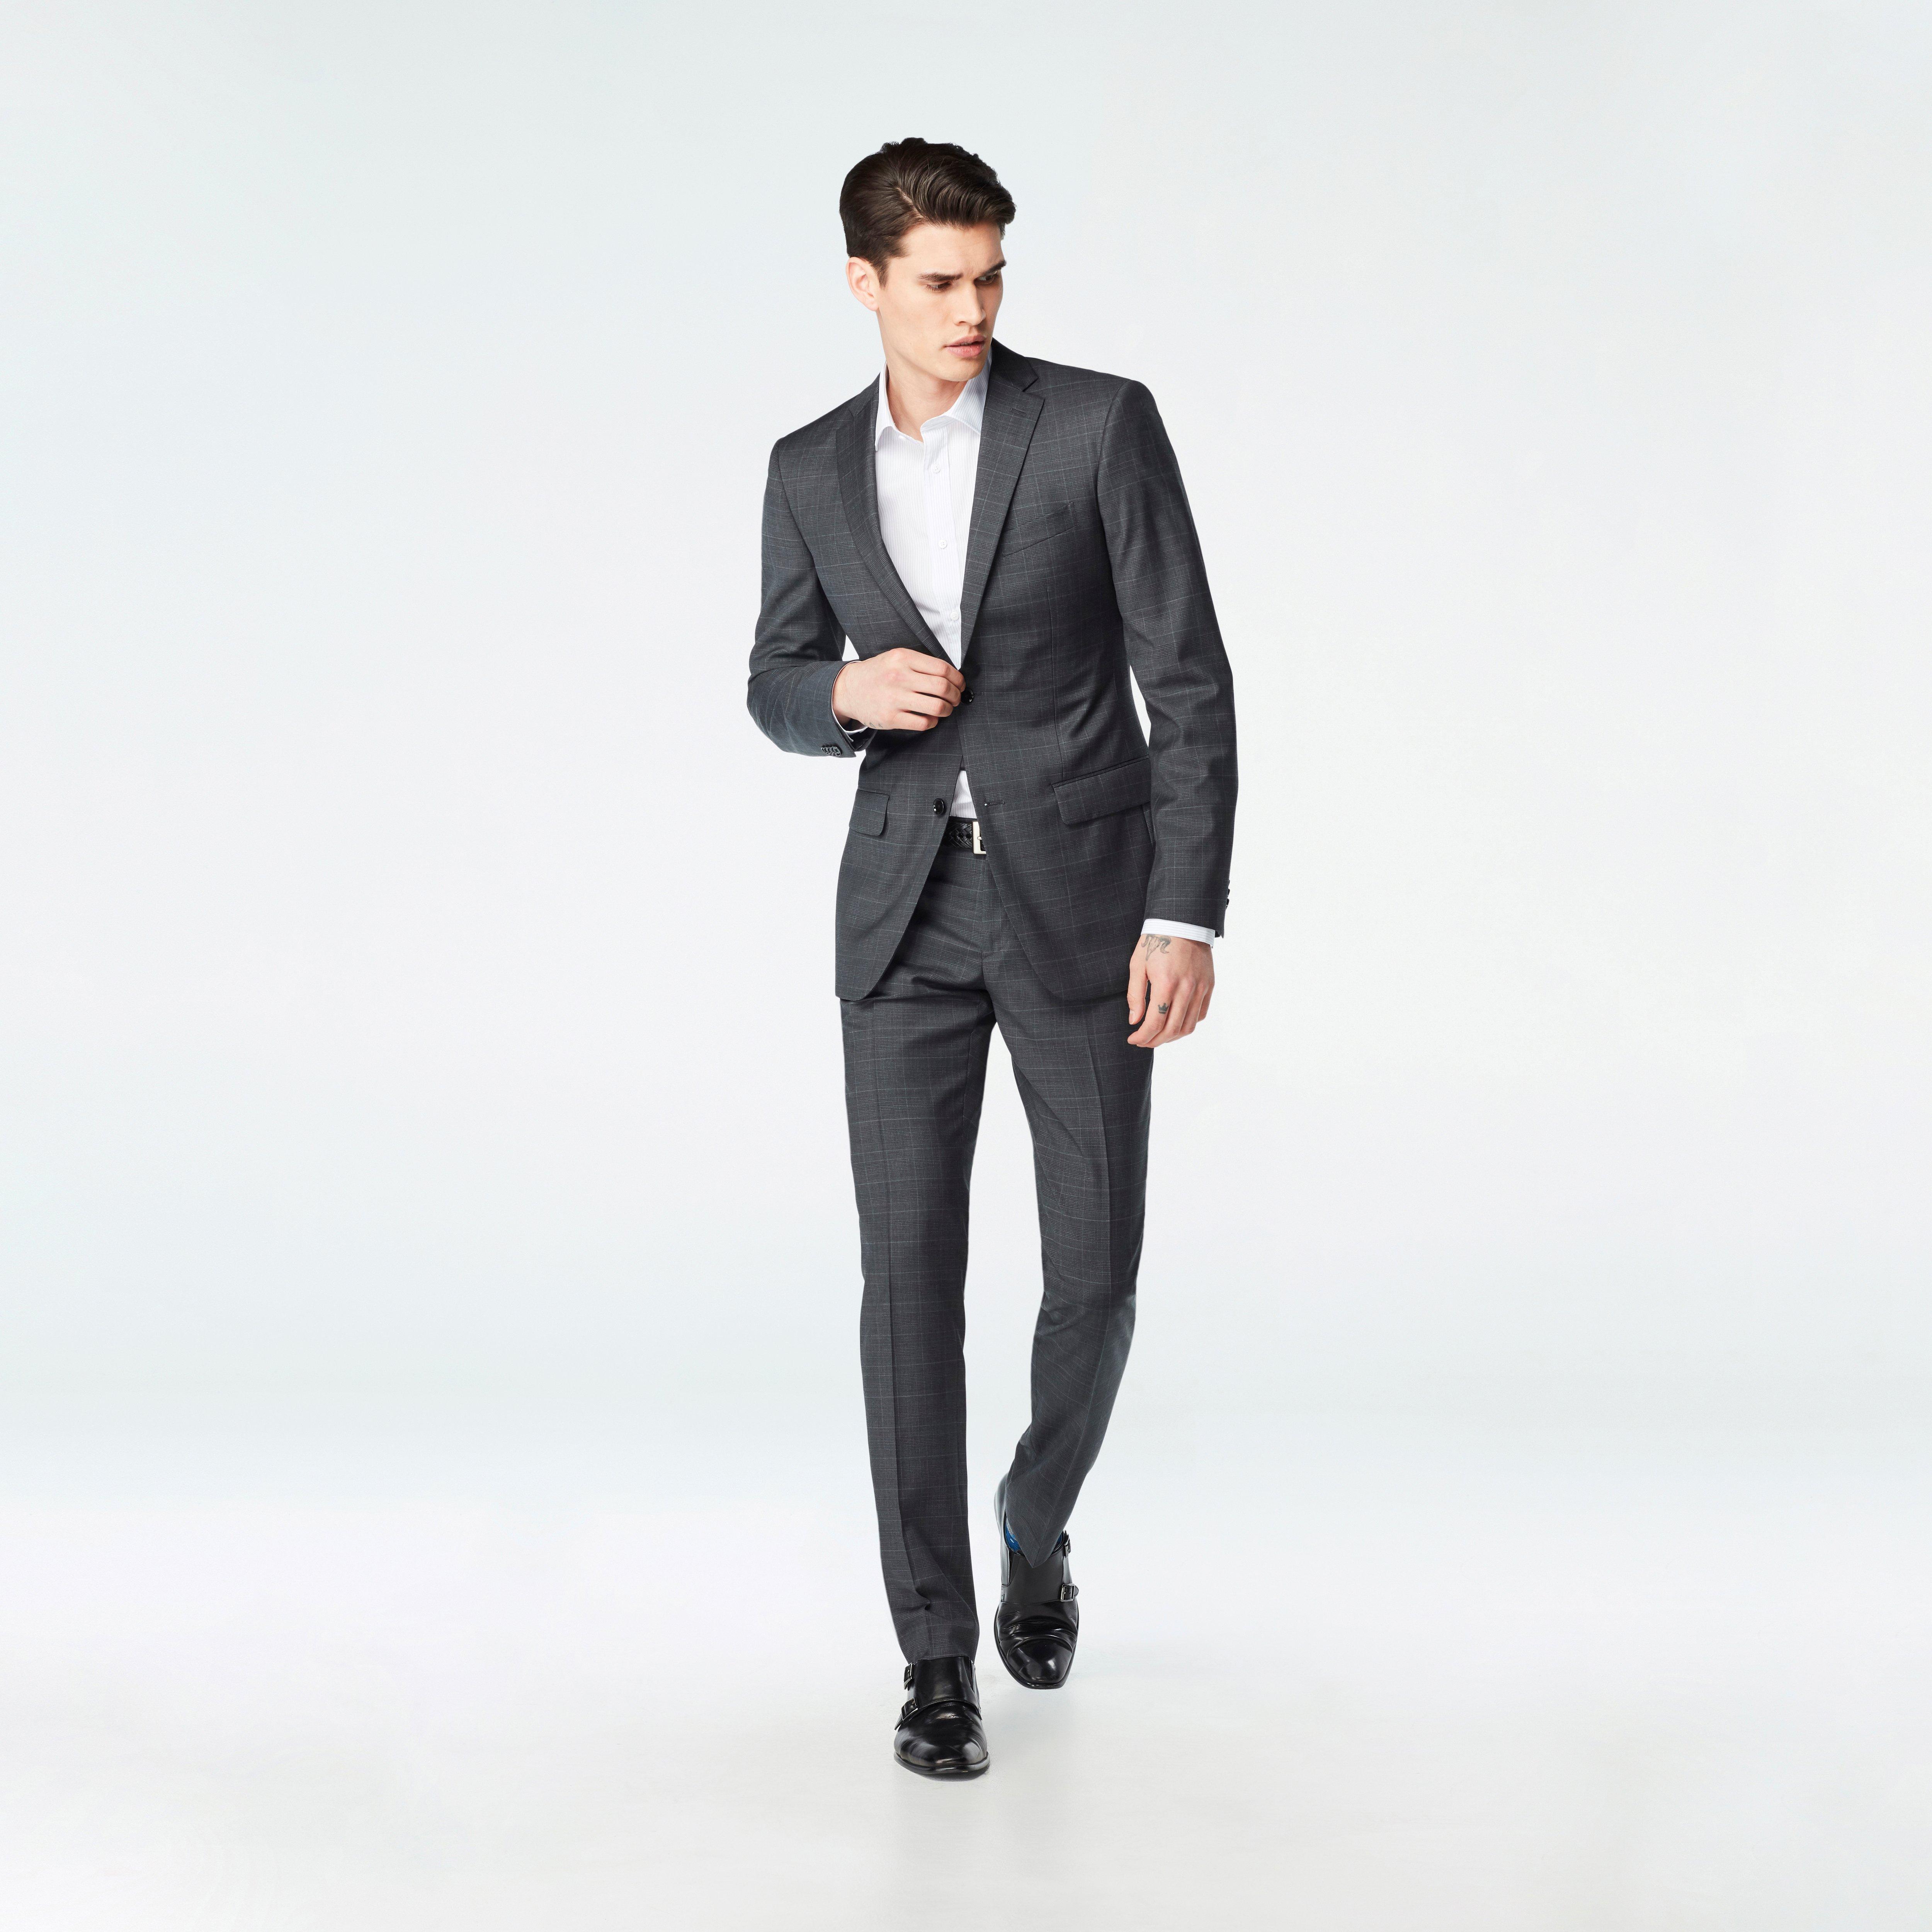 Custom Suits Made For You - Hemsworth Prince of Wales Charcoal Suit ...